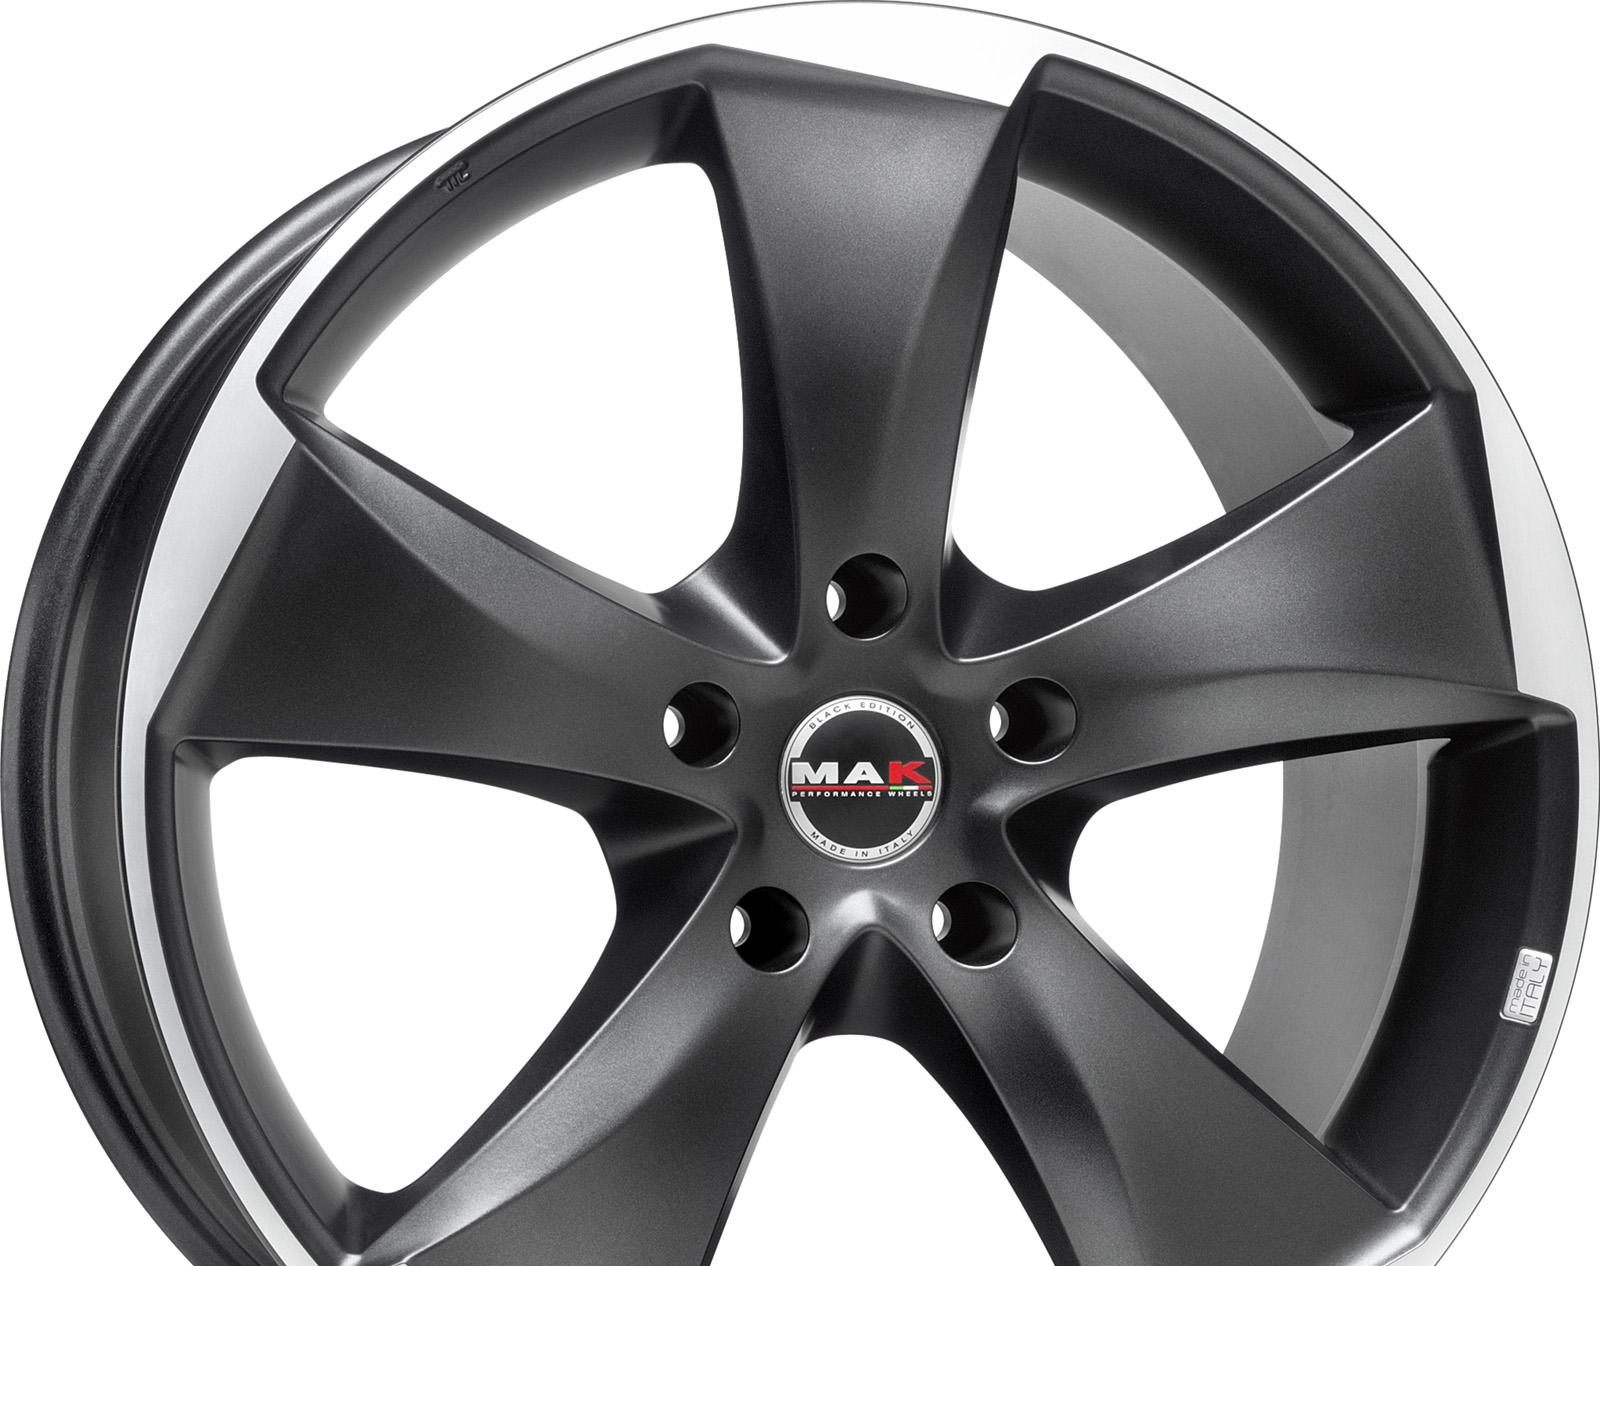 Wheel Mak Raptor 5 Grap.-MirFace 19x8.5inches/5x114.3mm - picture, photo, image